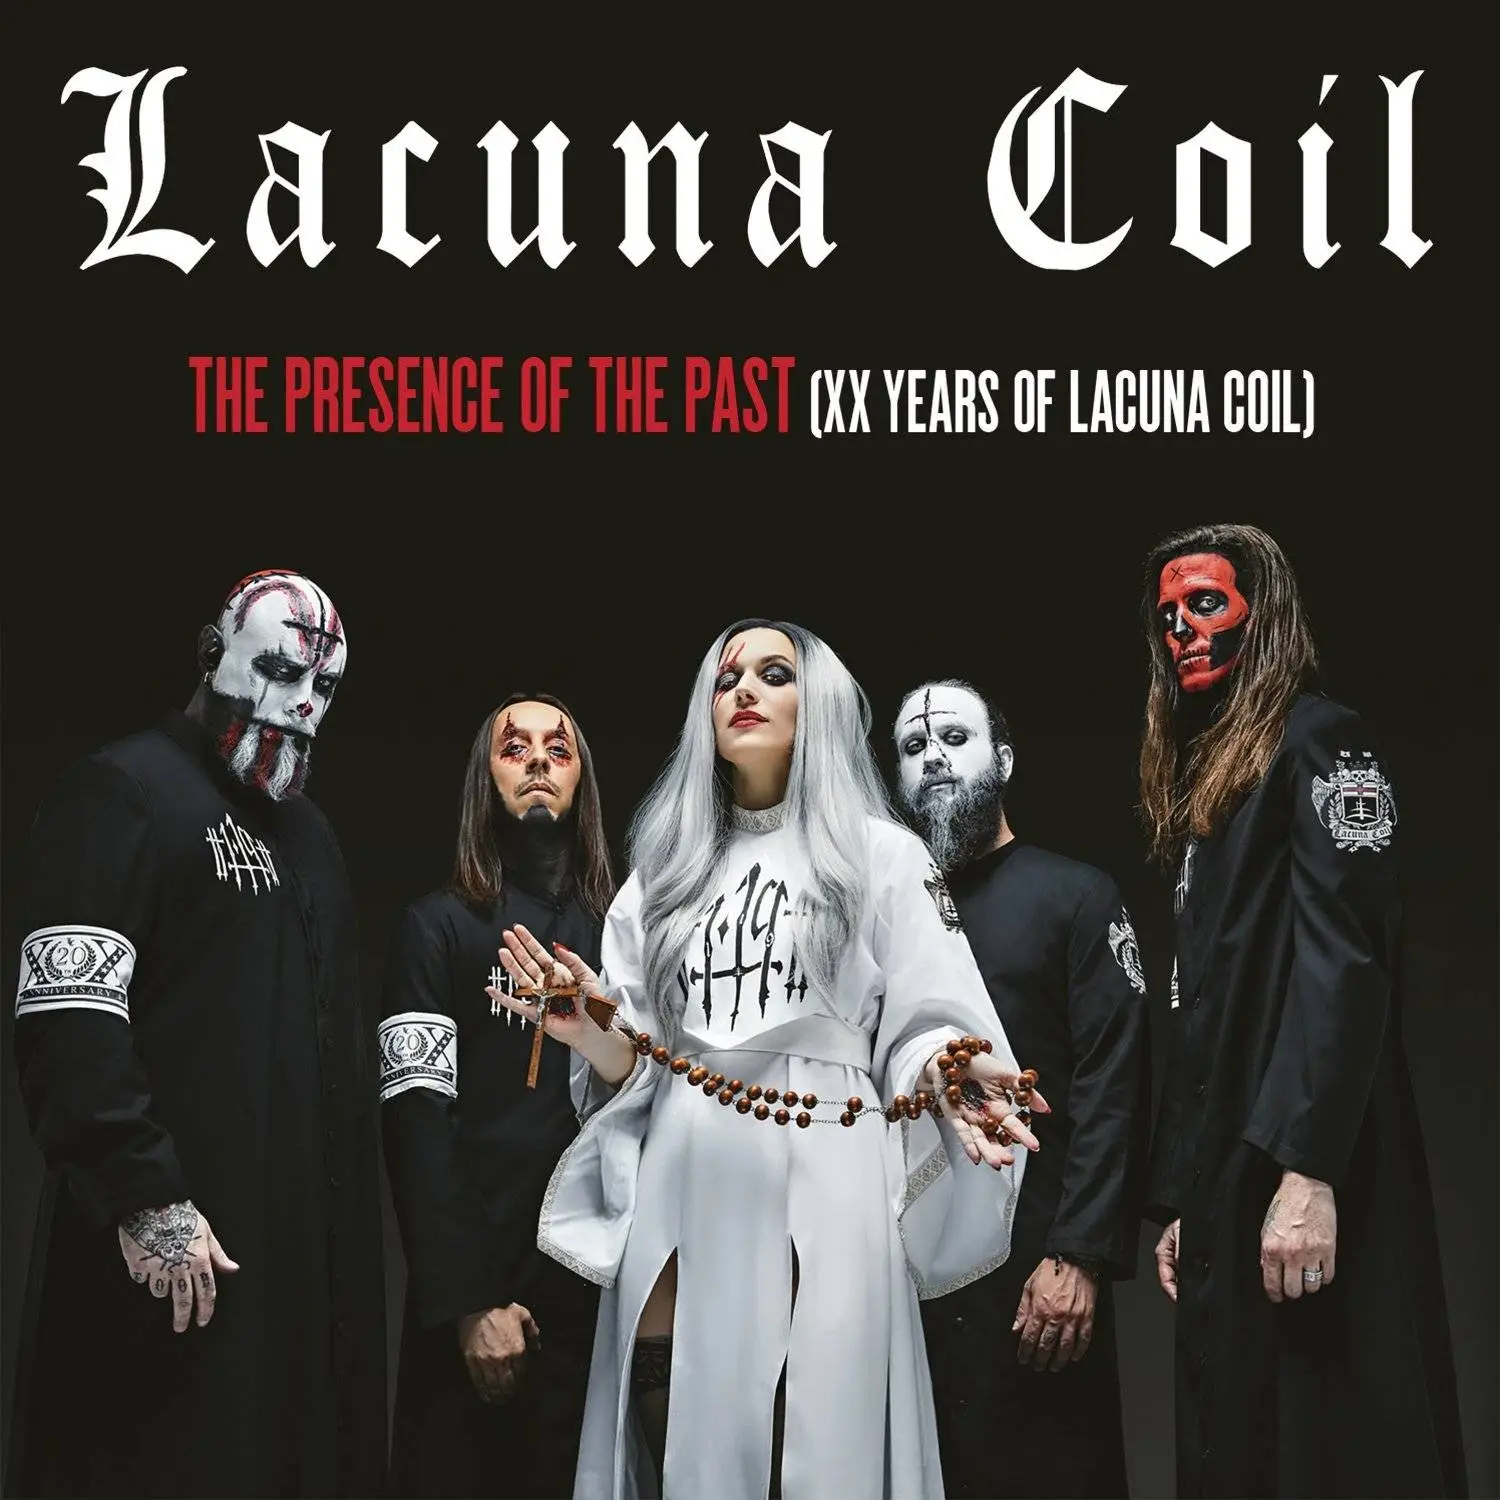 Lacuna Coil The Presence Of The Past Xx Years Of Lacuna Coil 13cd Box Set 2018 Avaxhome